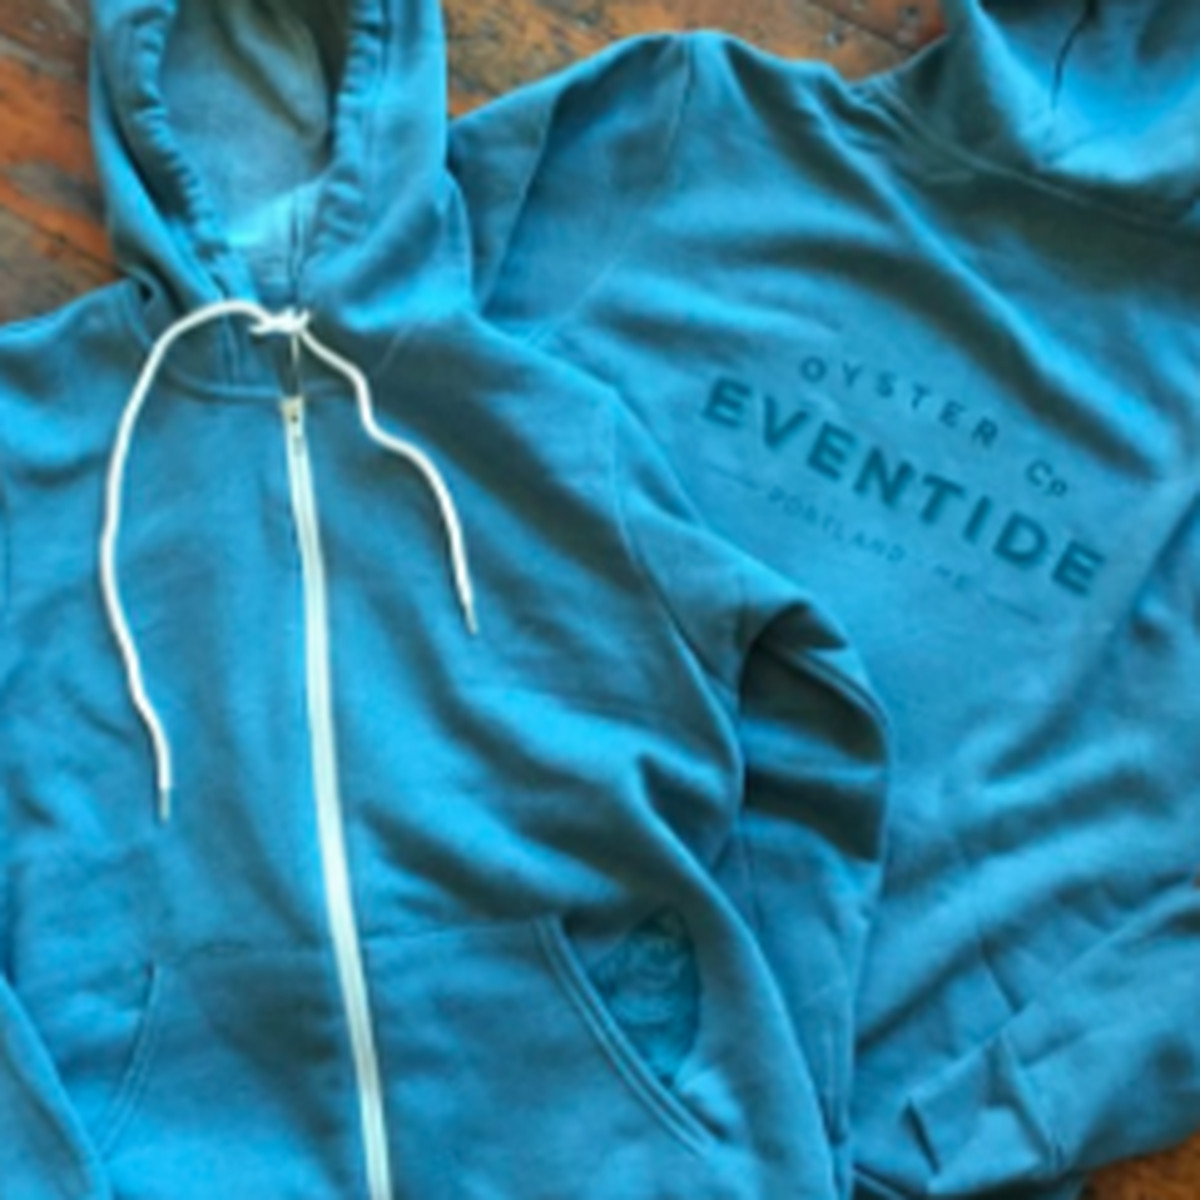 Two turquoise lightweight zip-up hoodies sit on a wooden floor